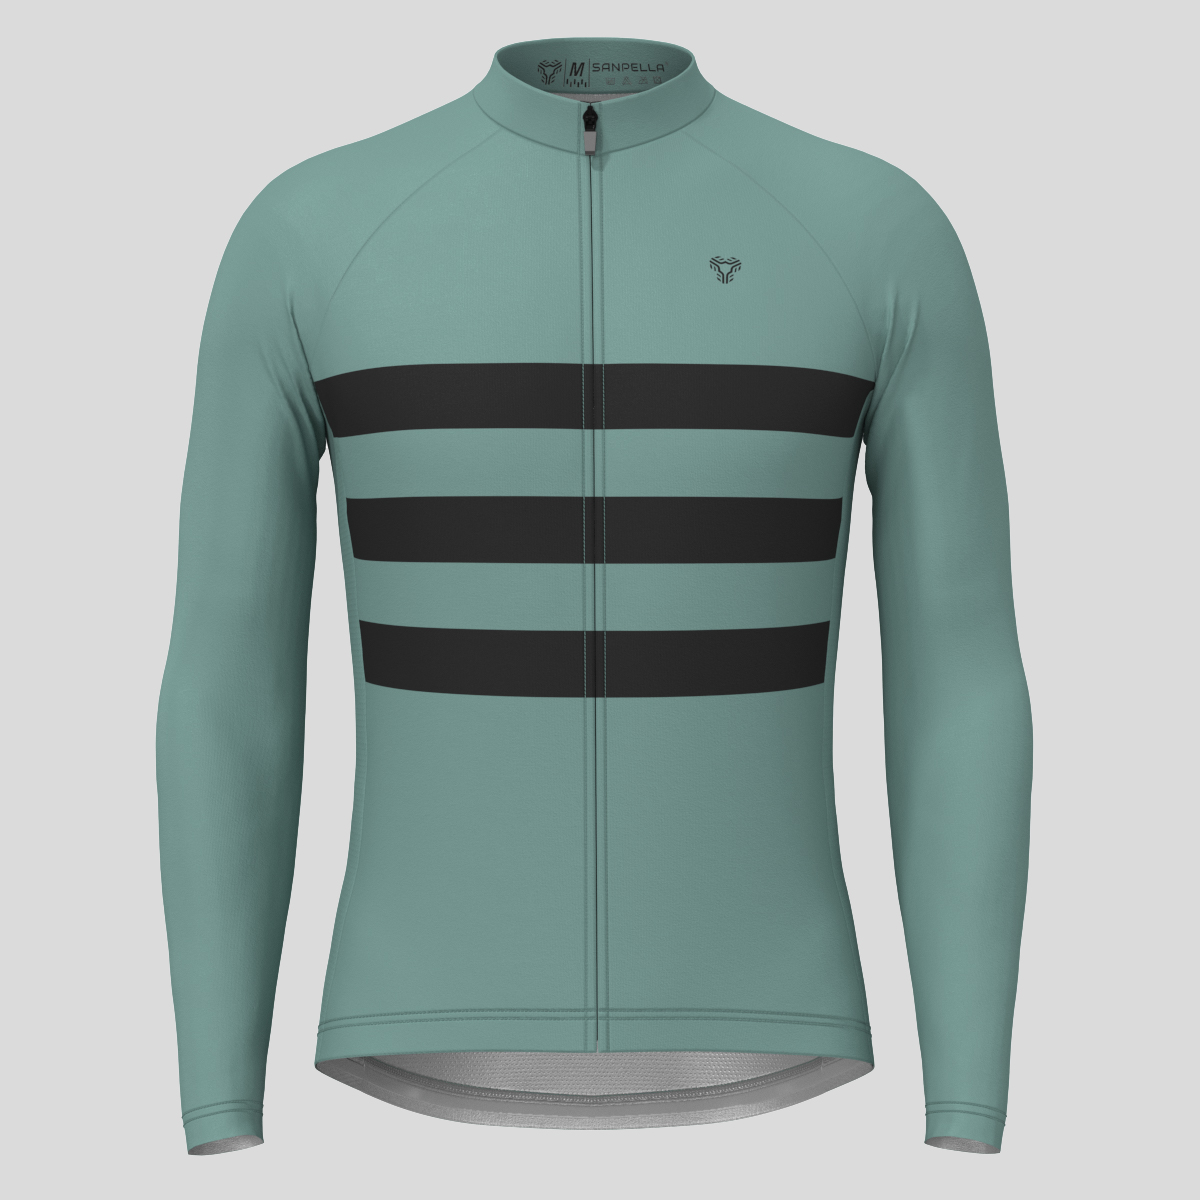 Men's Classic Stripes LS Cycling Jersey - Sage